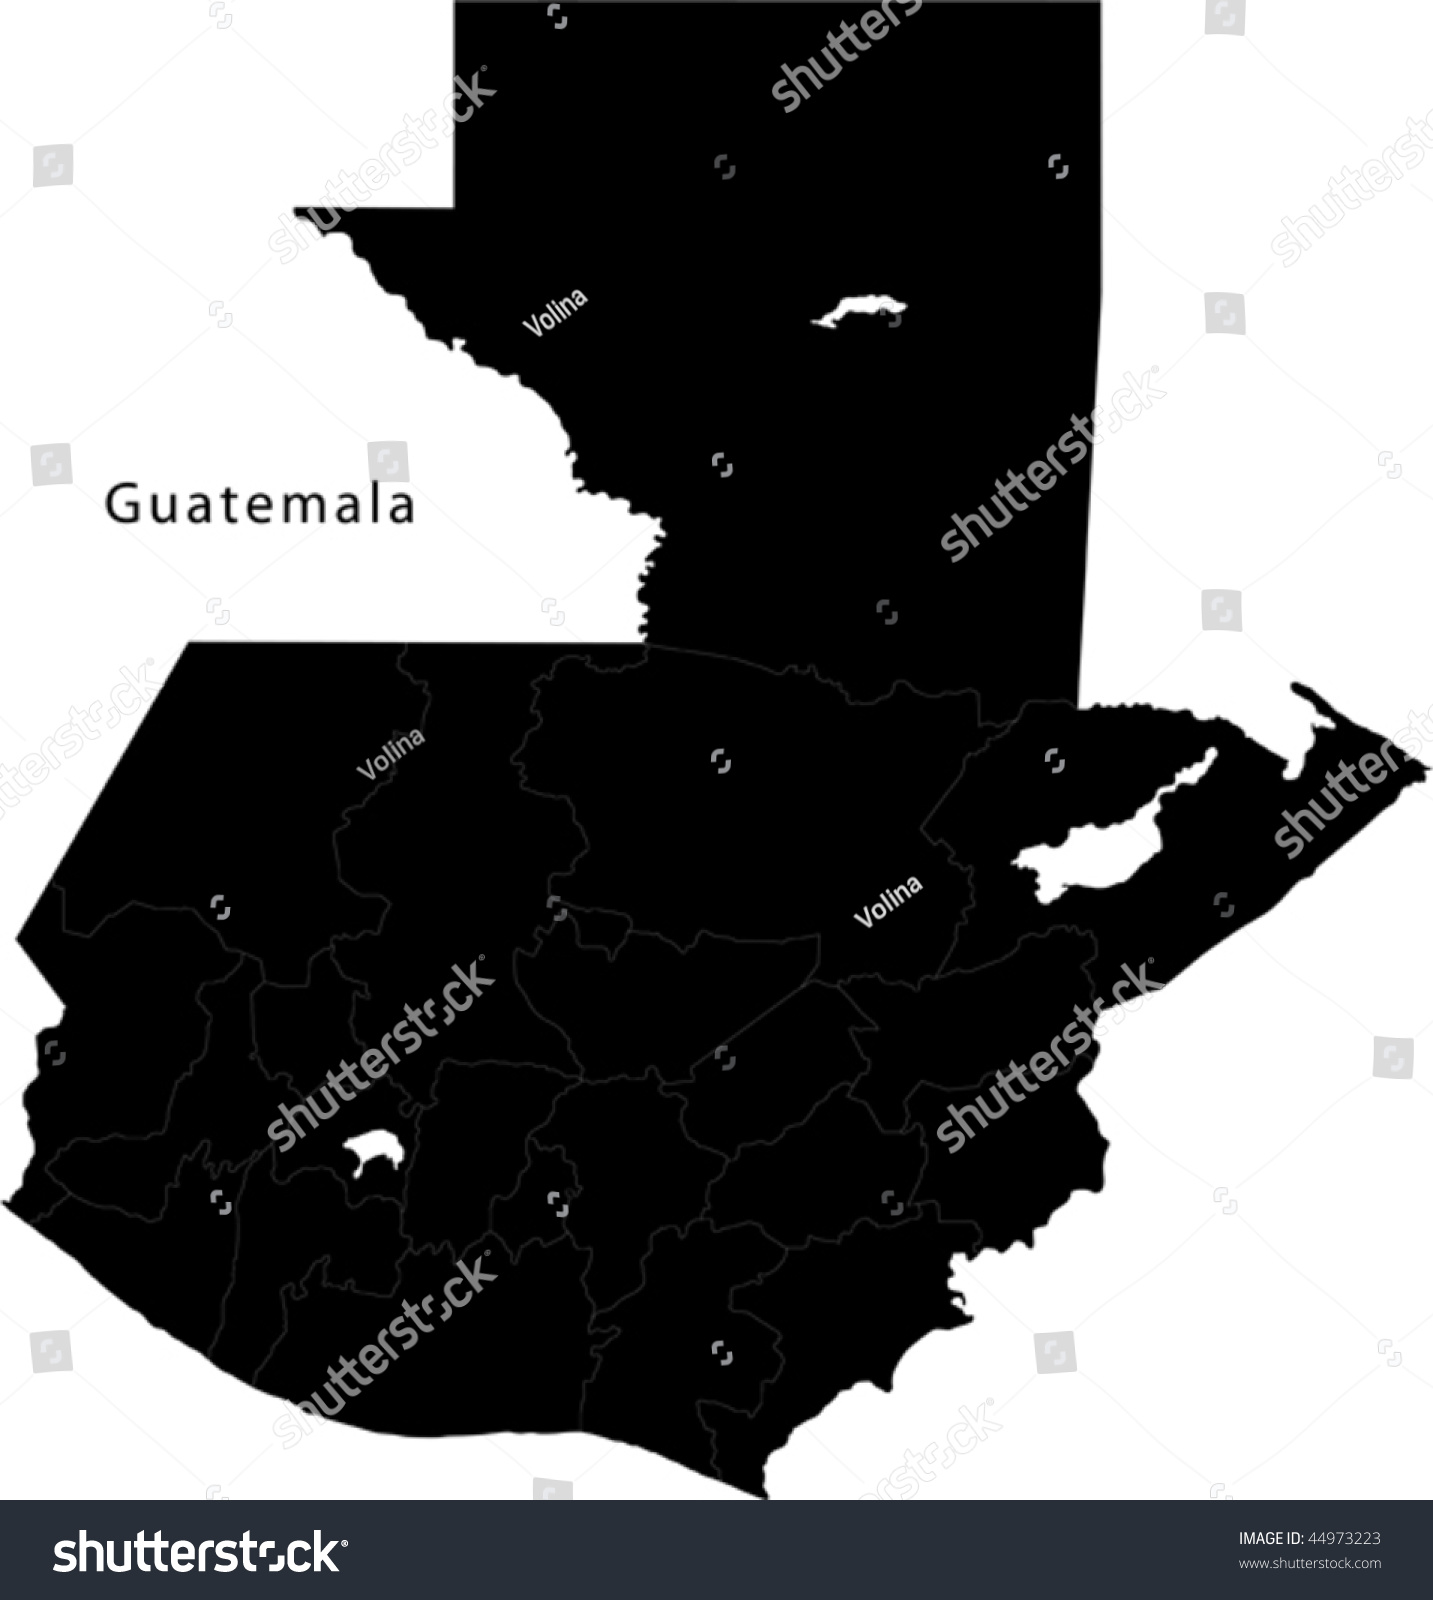 Black Guatemala Map With Department Borders Stock Vector Illustration ...